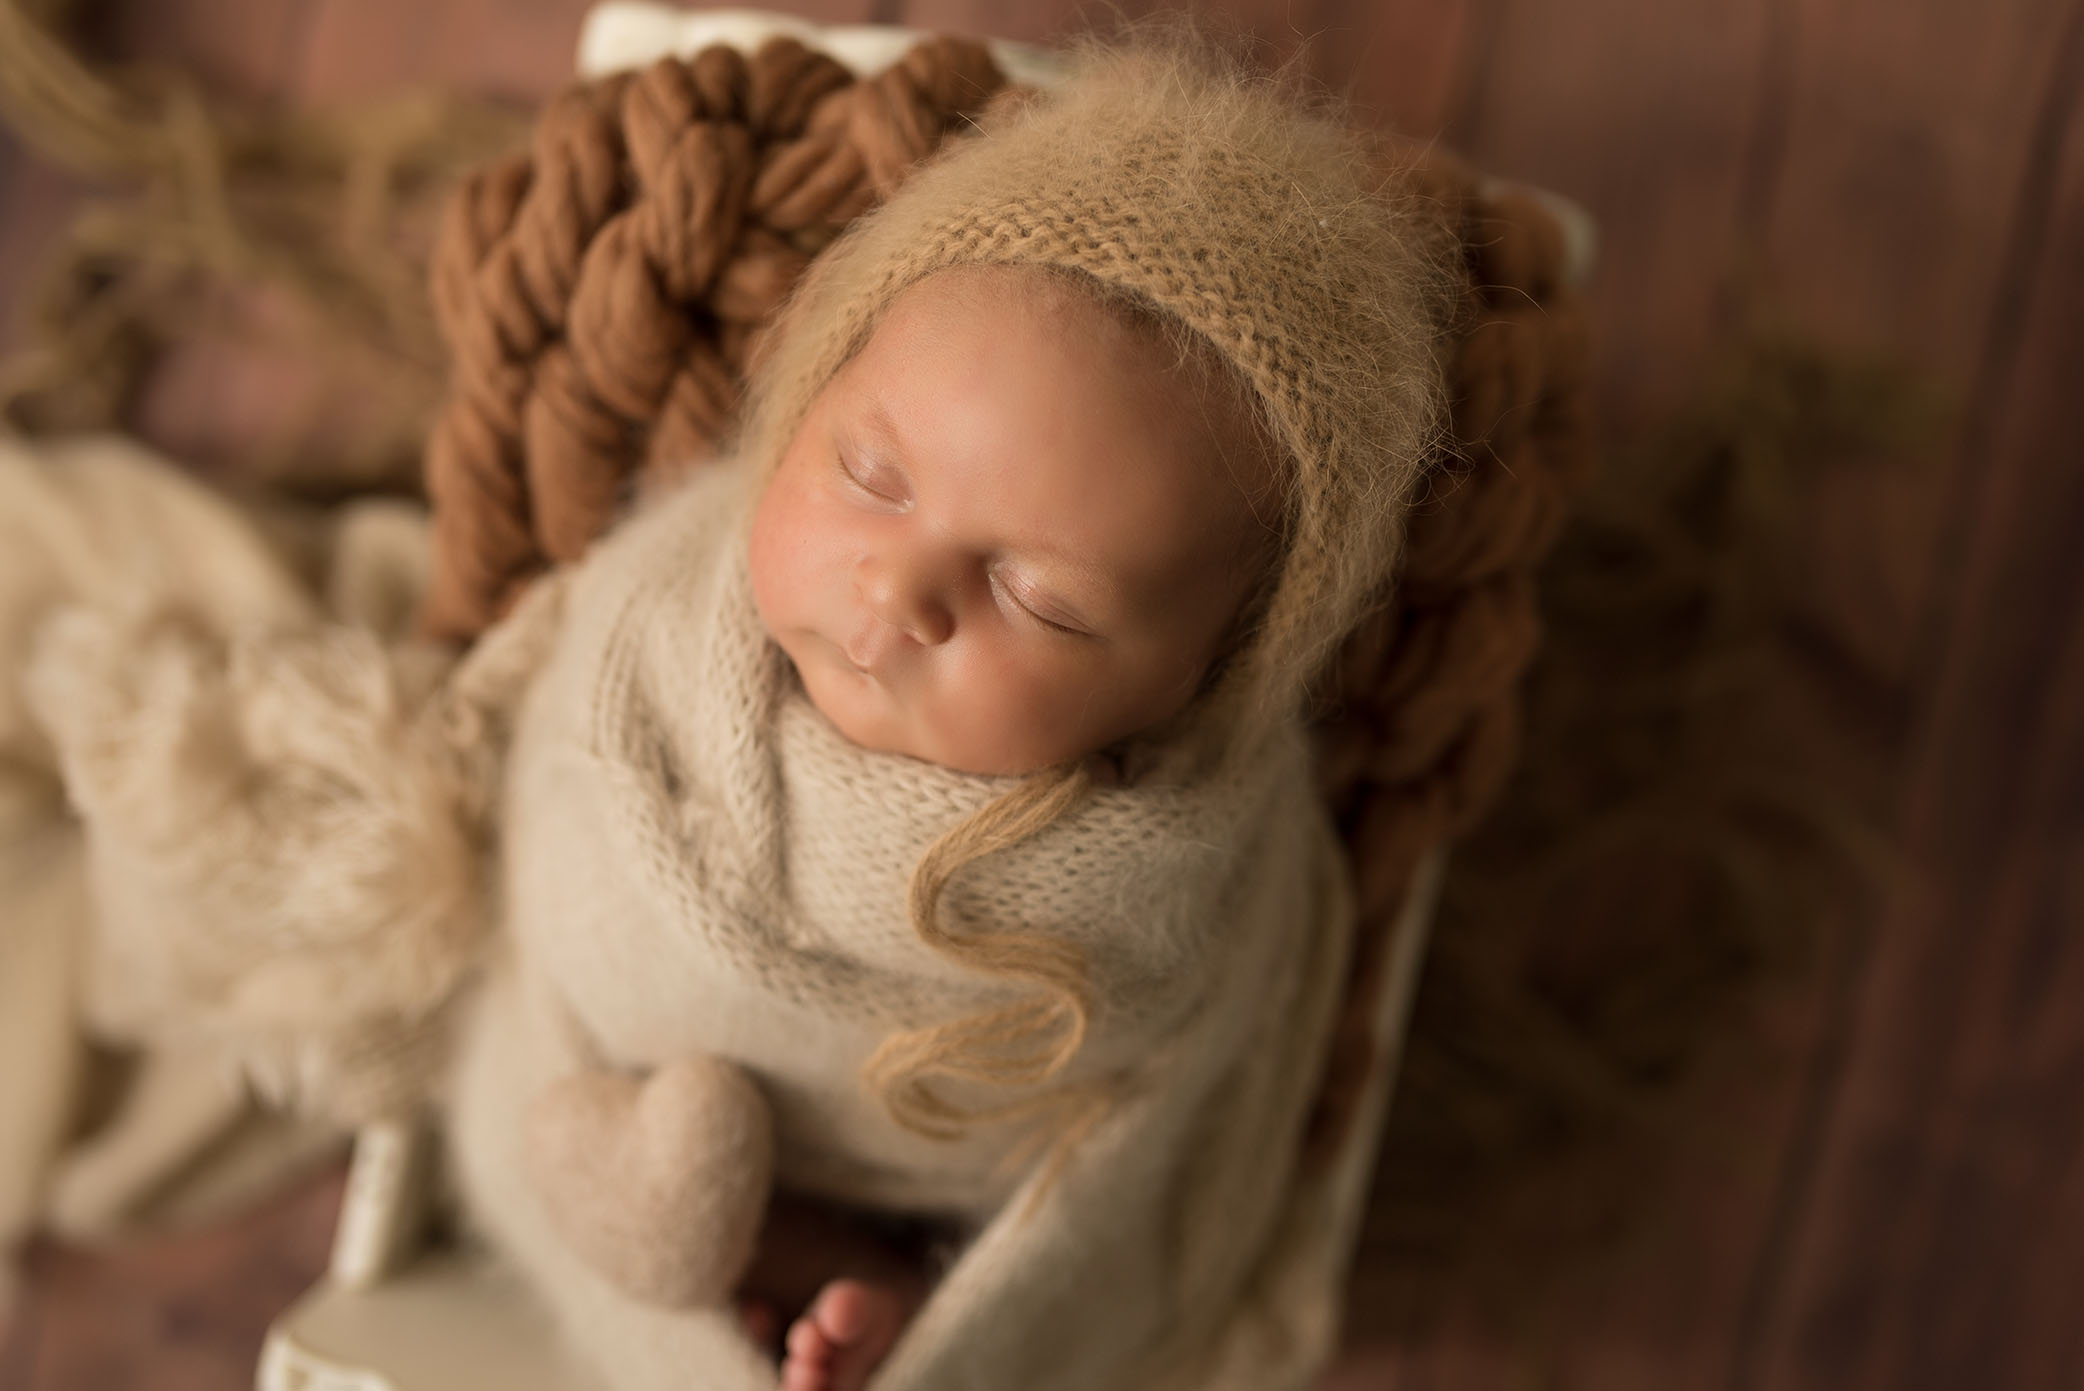 A newborn naps peacefully while wrapped in a soft blanket. 